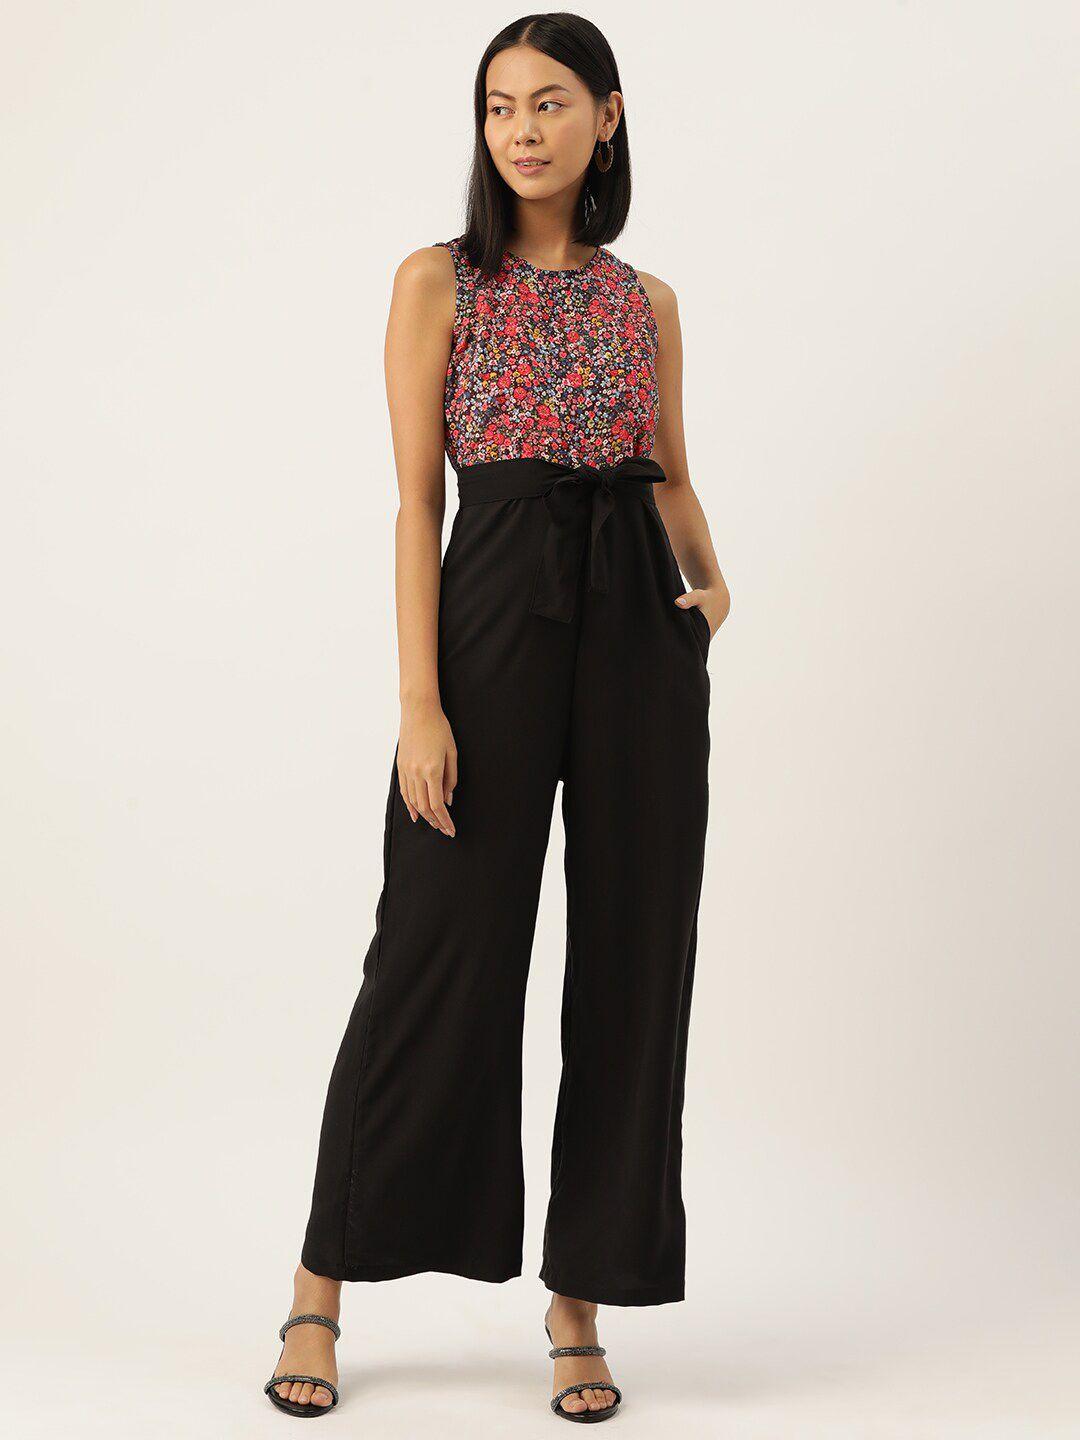 sirikit floral printed round neck jumpsuit with belt